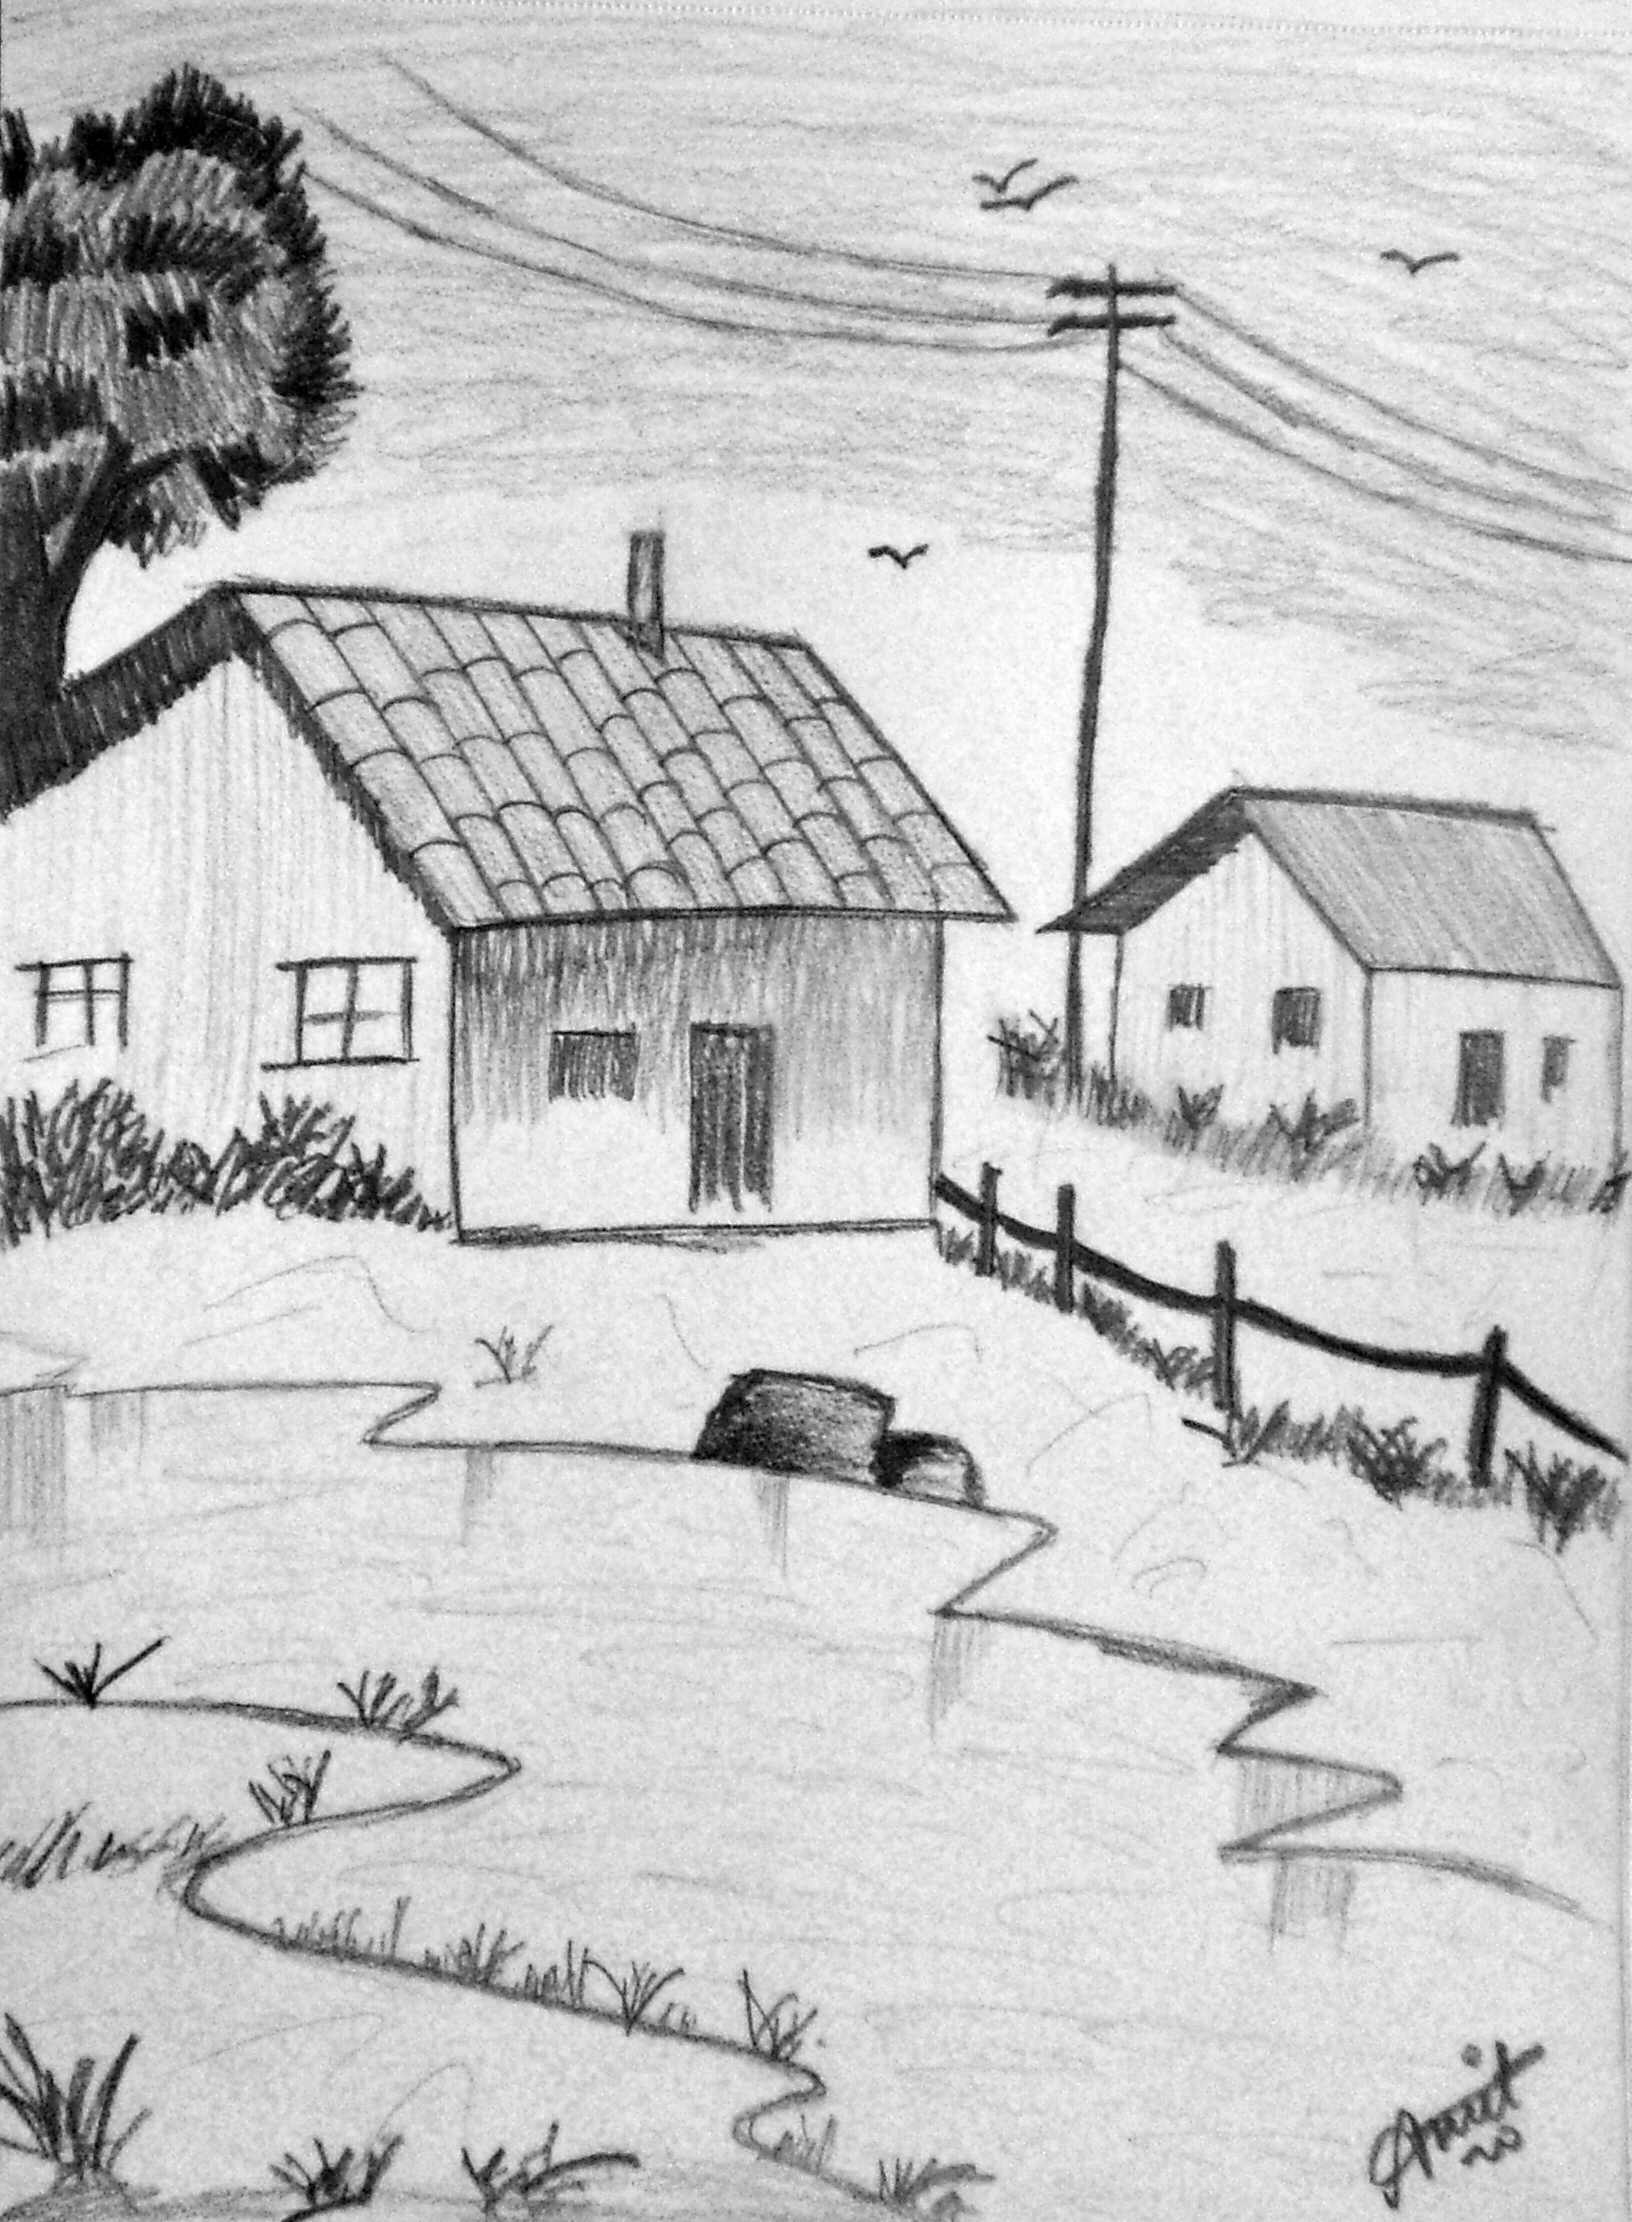 How to Draw a simple Landscape - Easy Pencil Drawing - YouTube